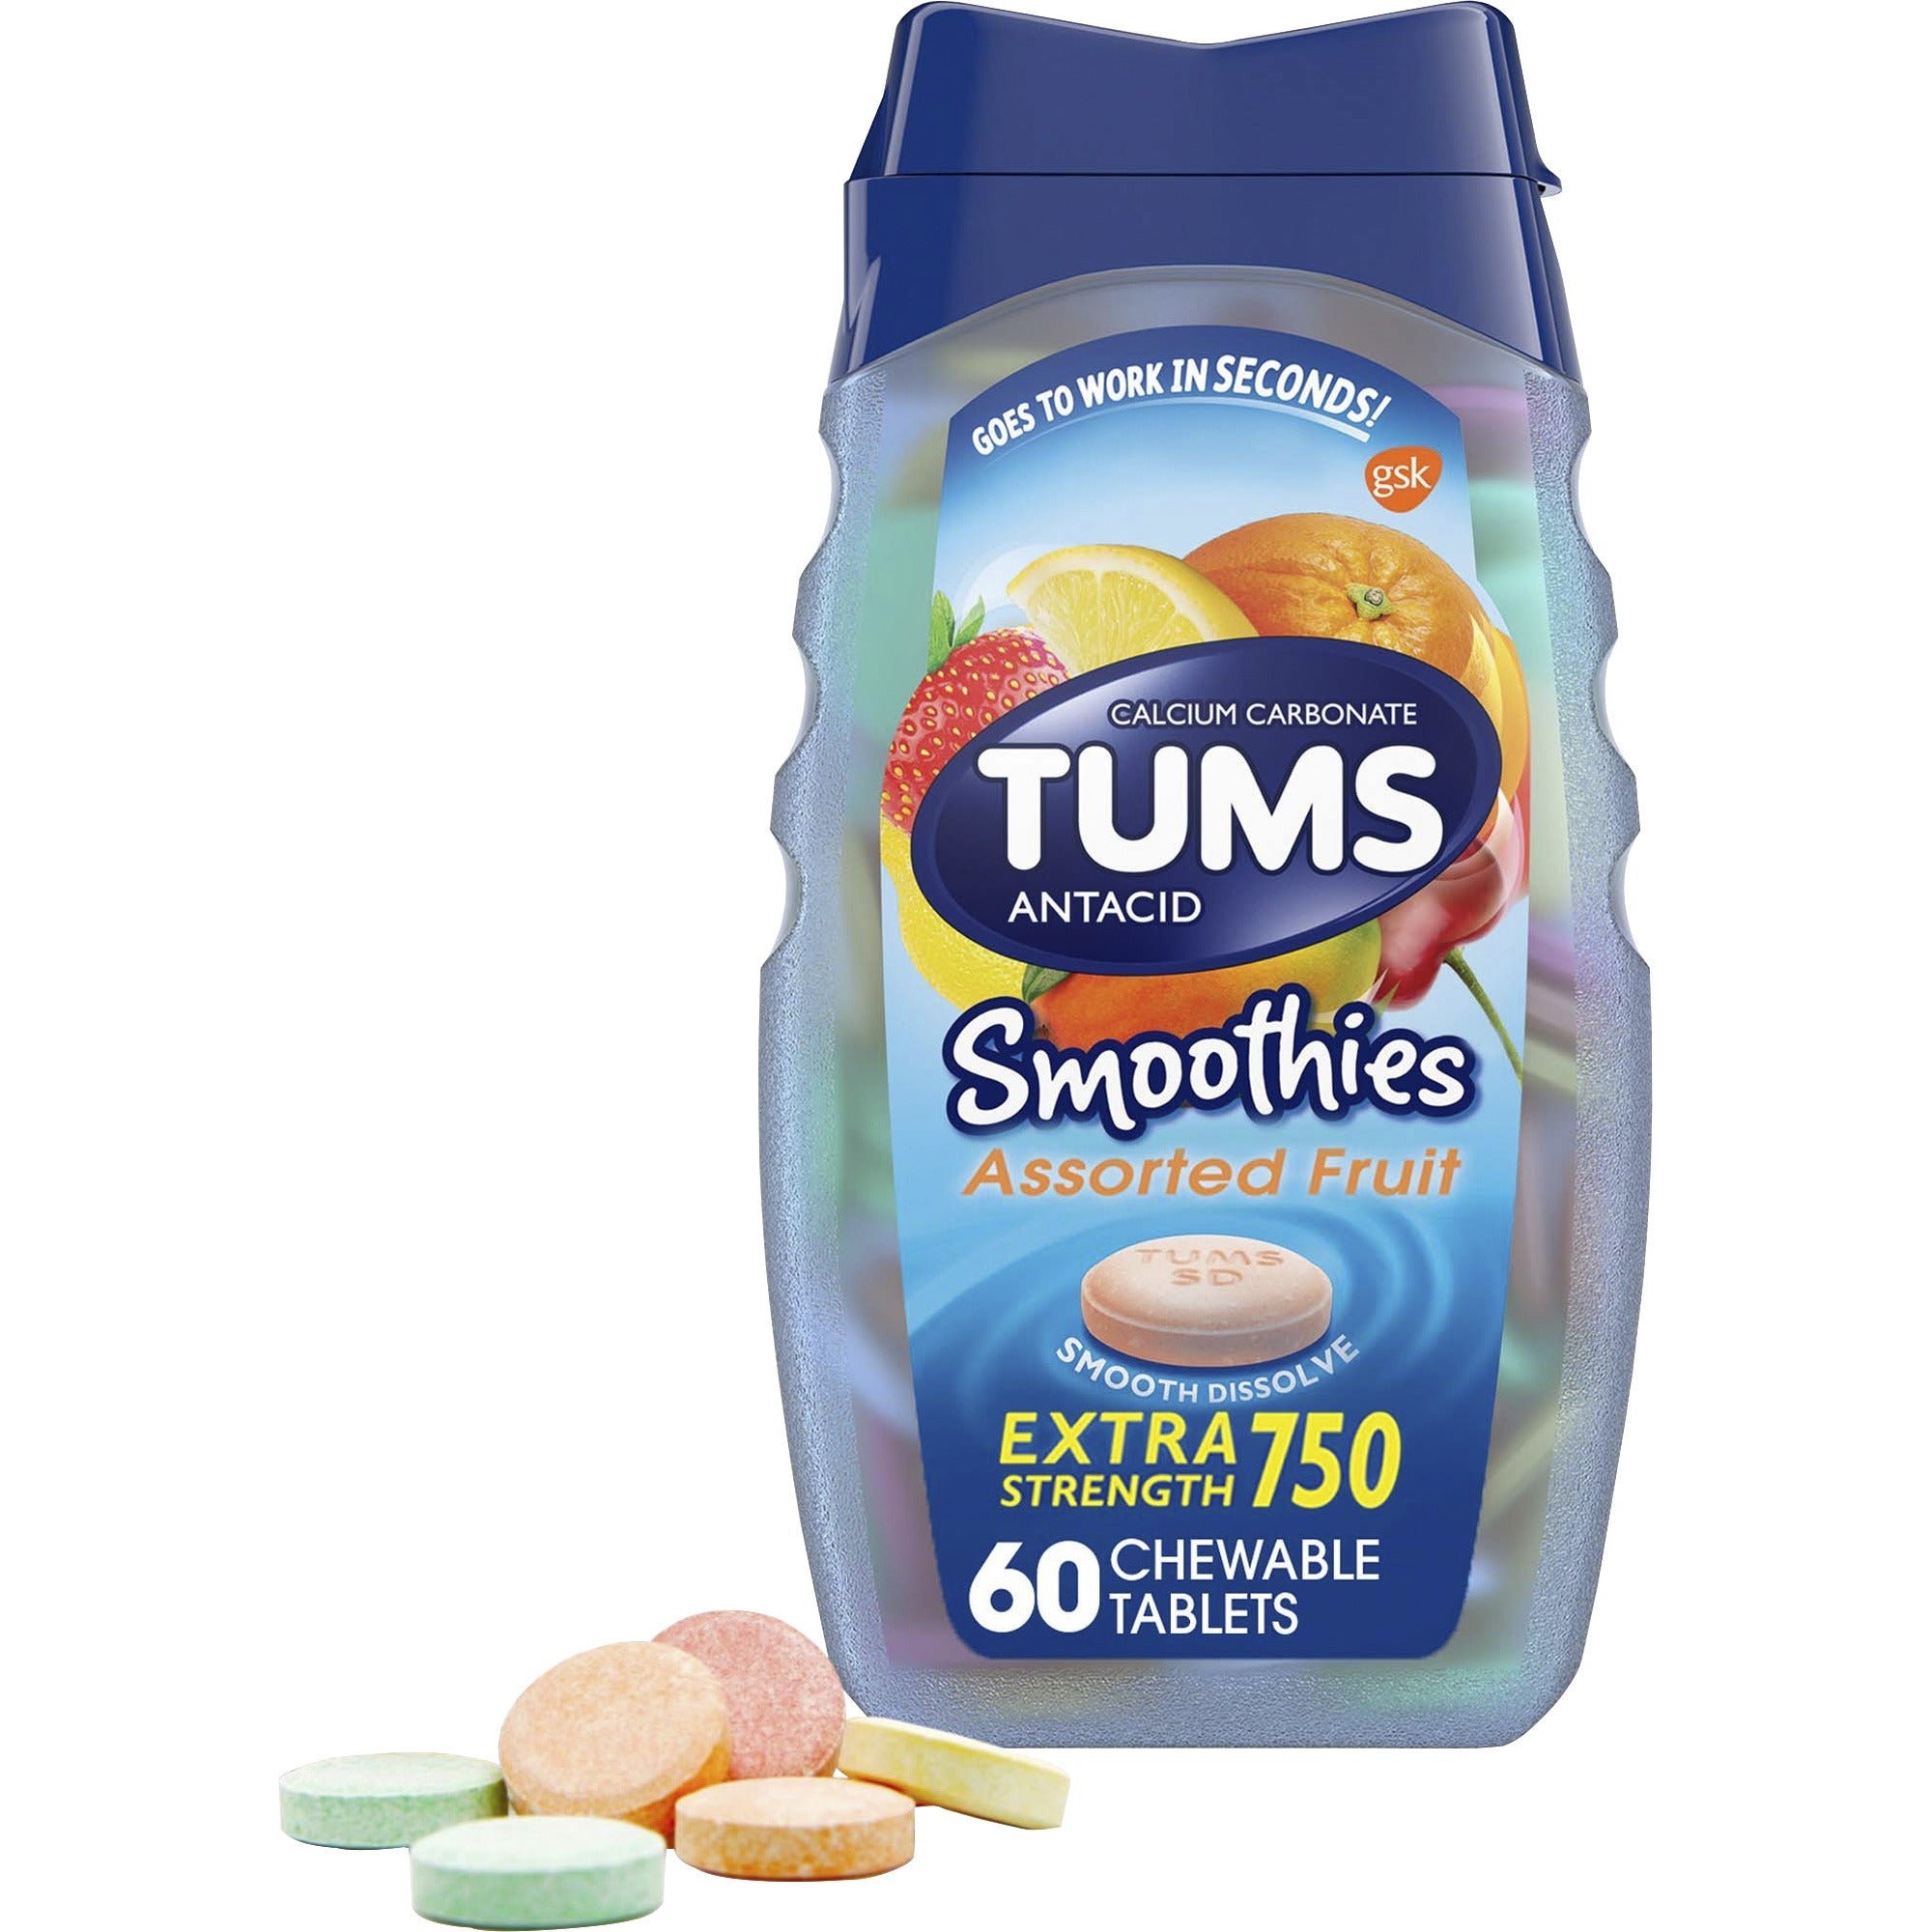 TUMS Smoothies Extra Strength Antacid Chewable Tablet - For Acid Indigestion, Heartburn, Sour Stomach, Upset Stomach - Assorted Fruit - 1 EachBottle - 1